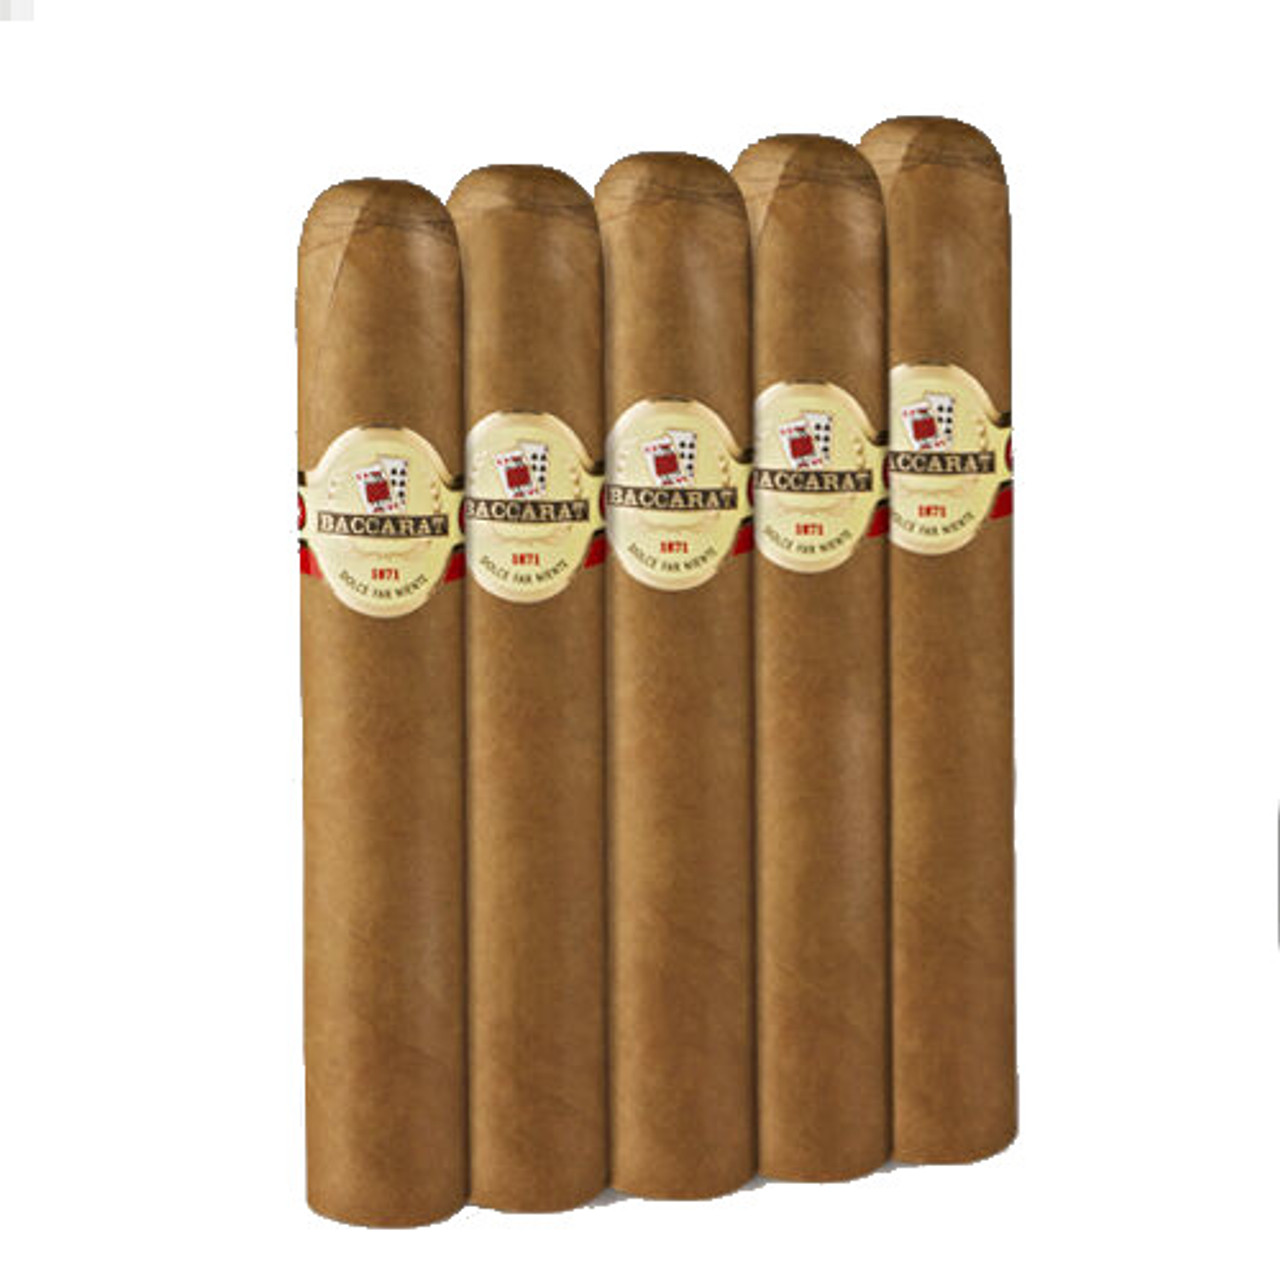 Baccarat Gordo Cigars - 6 x 60 (Pack of 5)